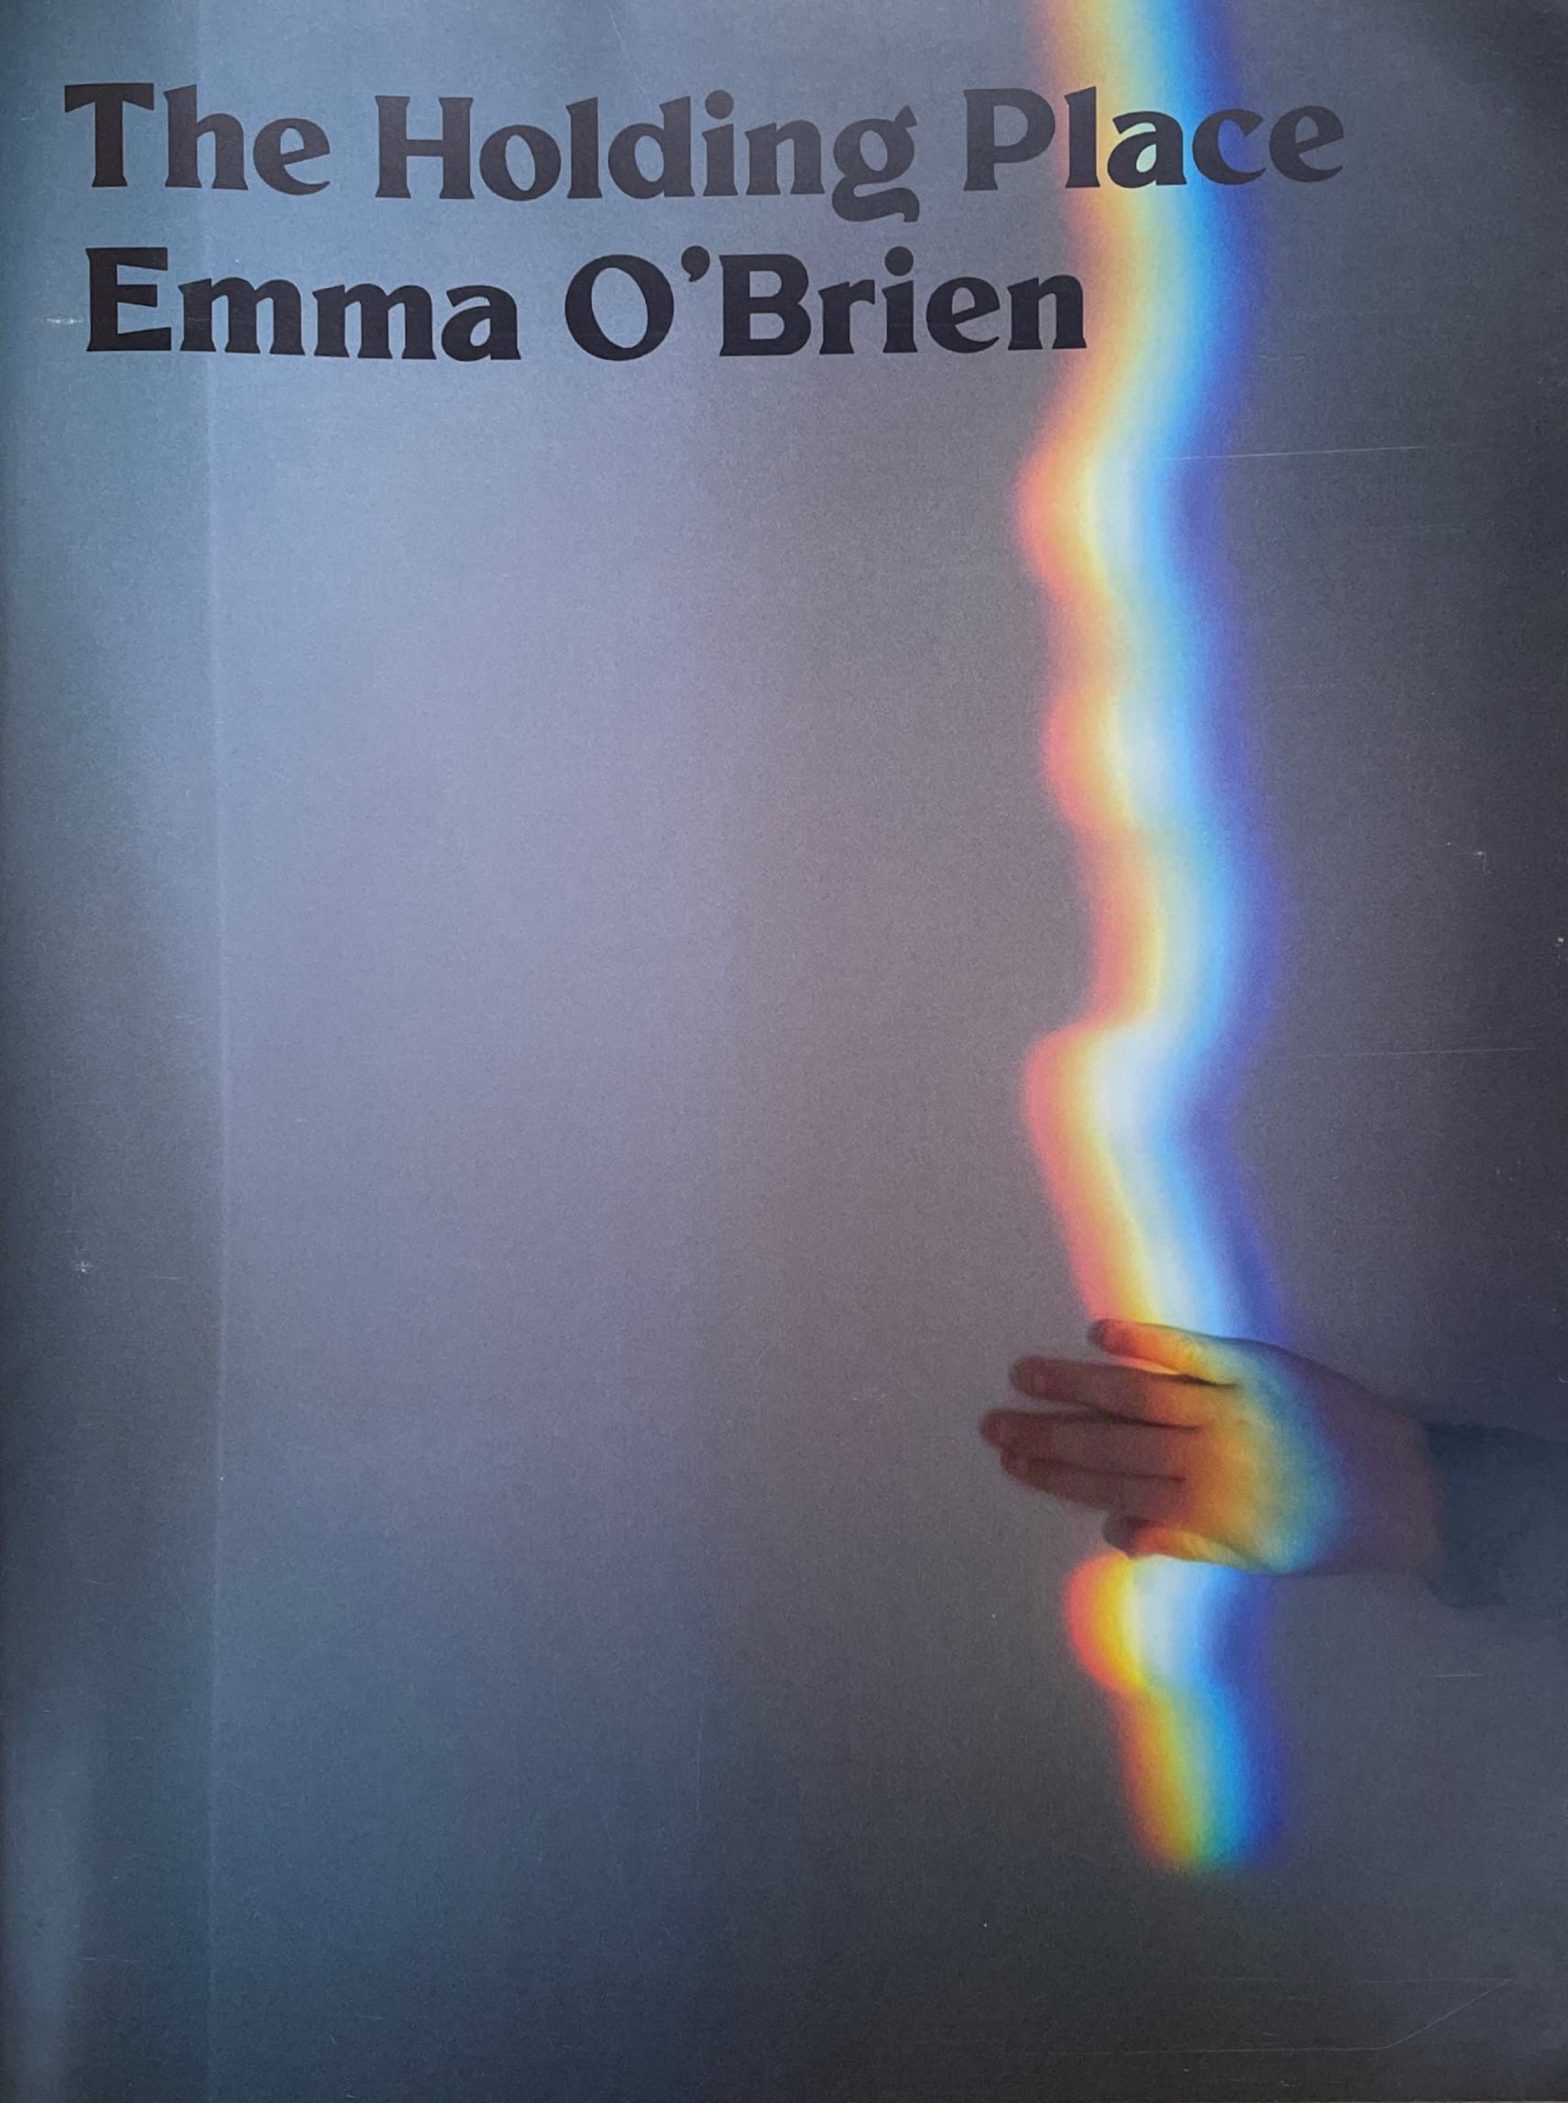 The Holding Place, Emma O'Brien